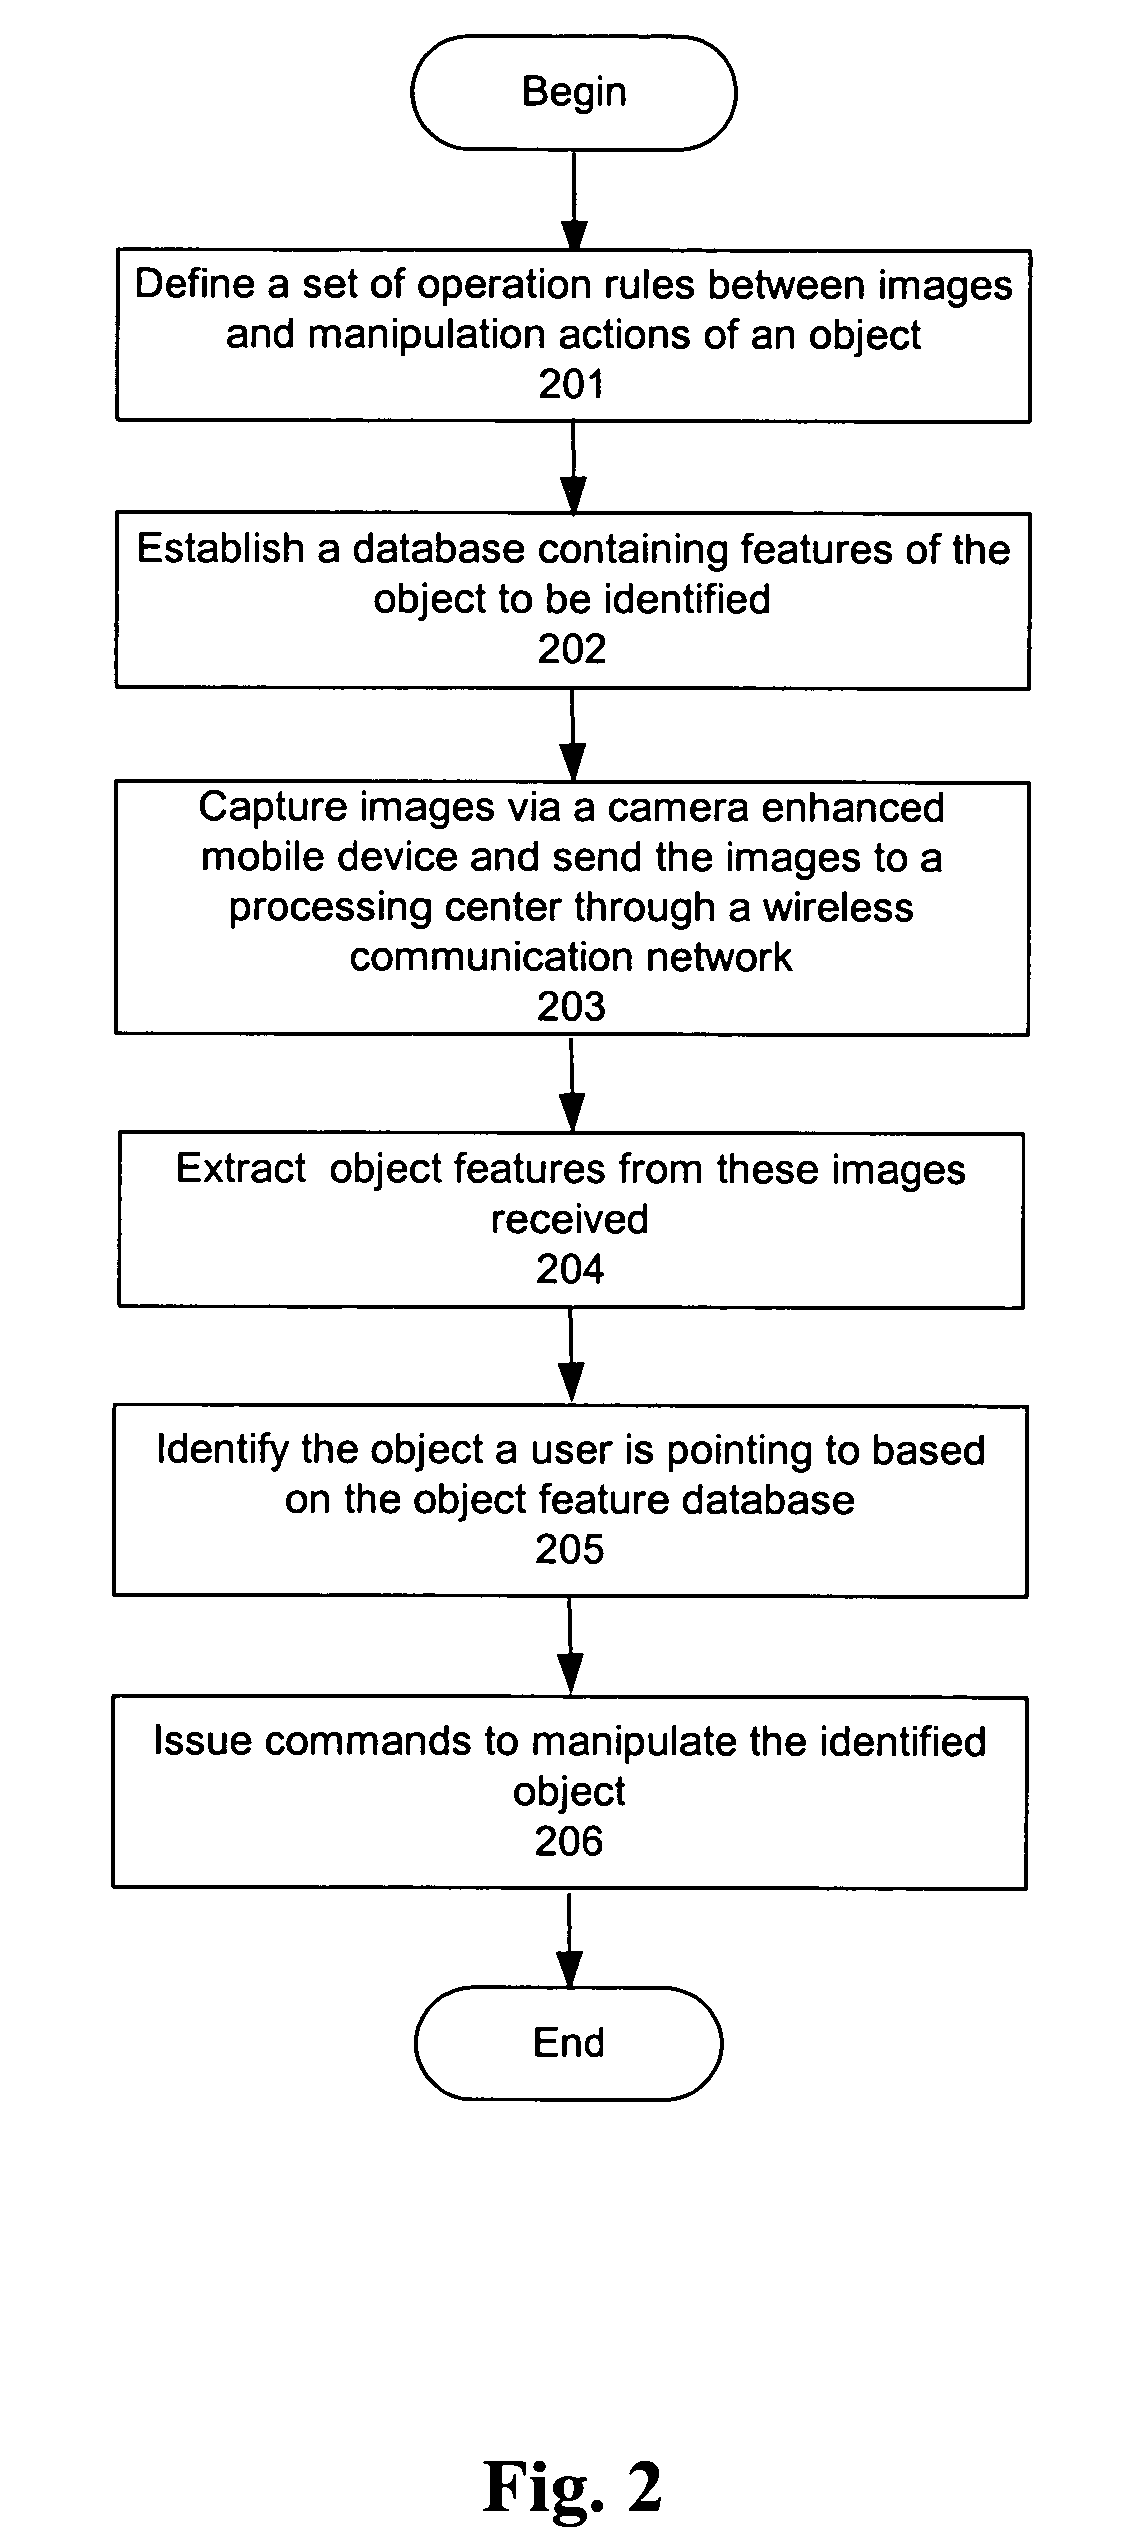 System and method for interacting with objects via a camera enhanced mobile device